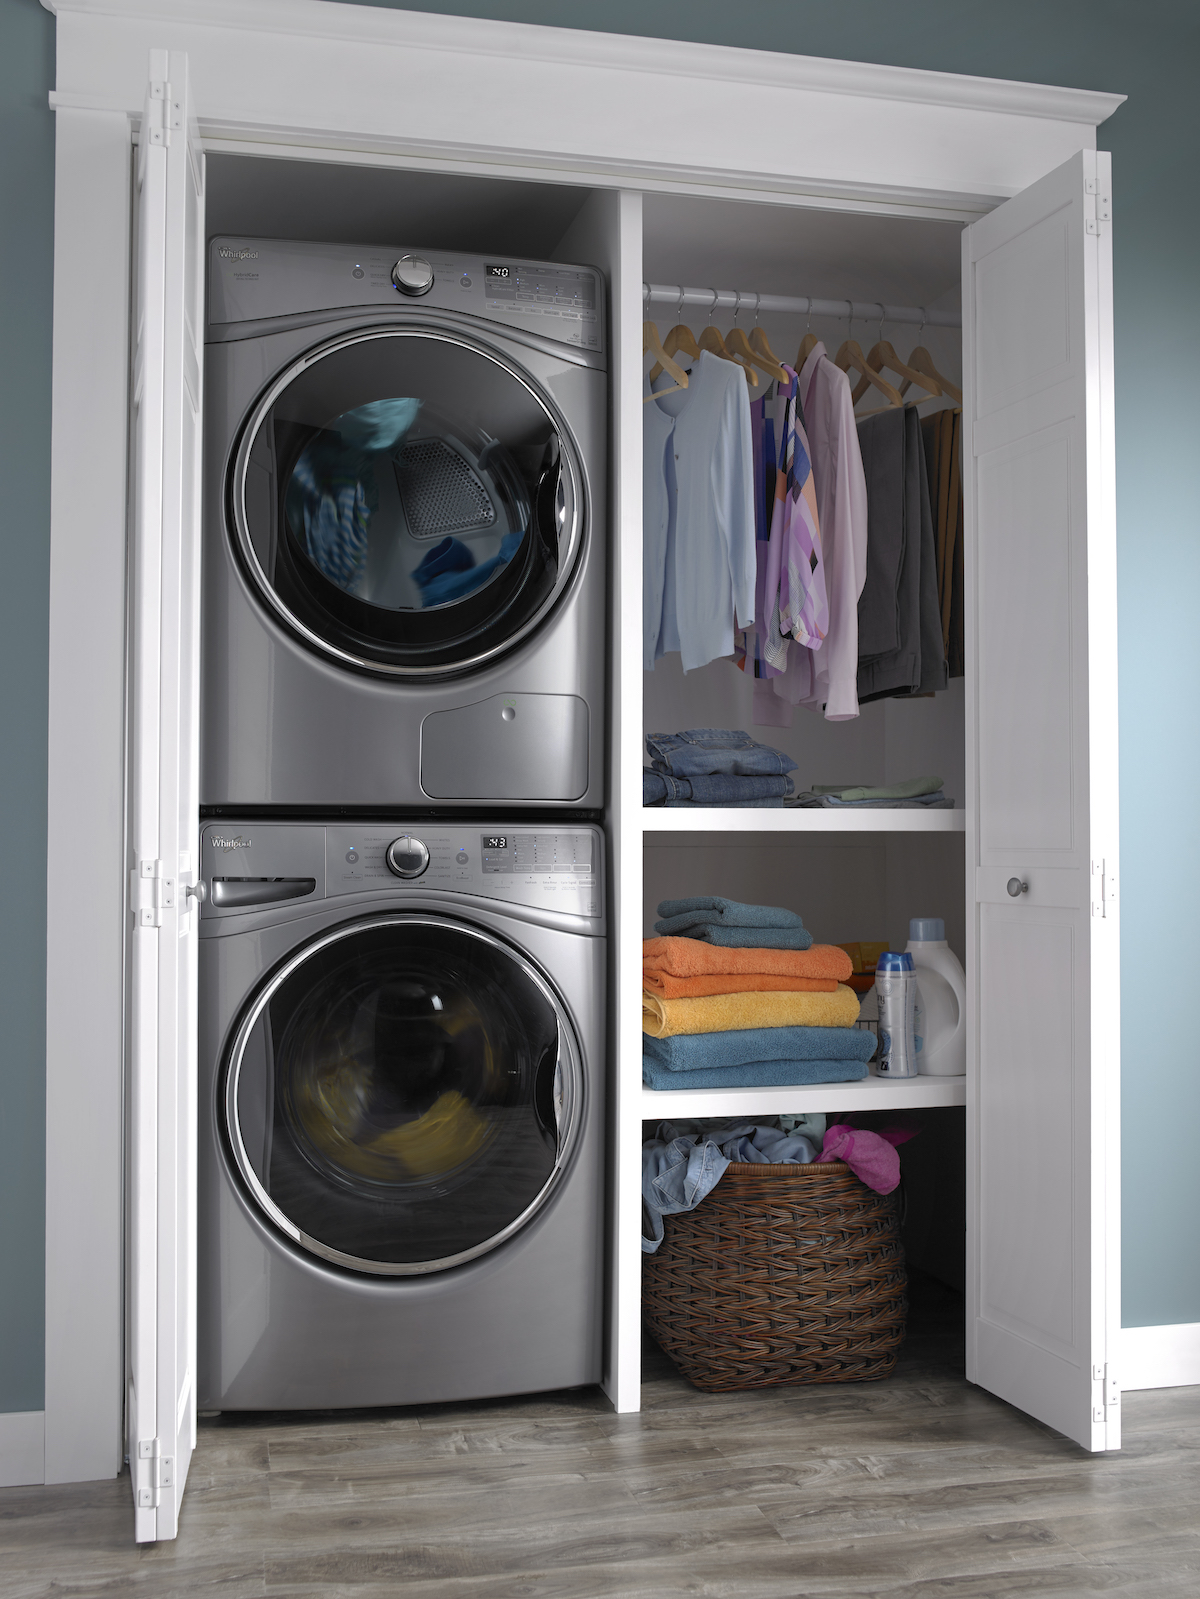 The ventless Whirlpool HybridCare clothes dryer’s Hybrid Heat Pump technology provides the flexibility to place dryers virtually anywhere in the home